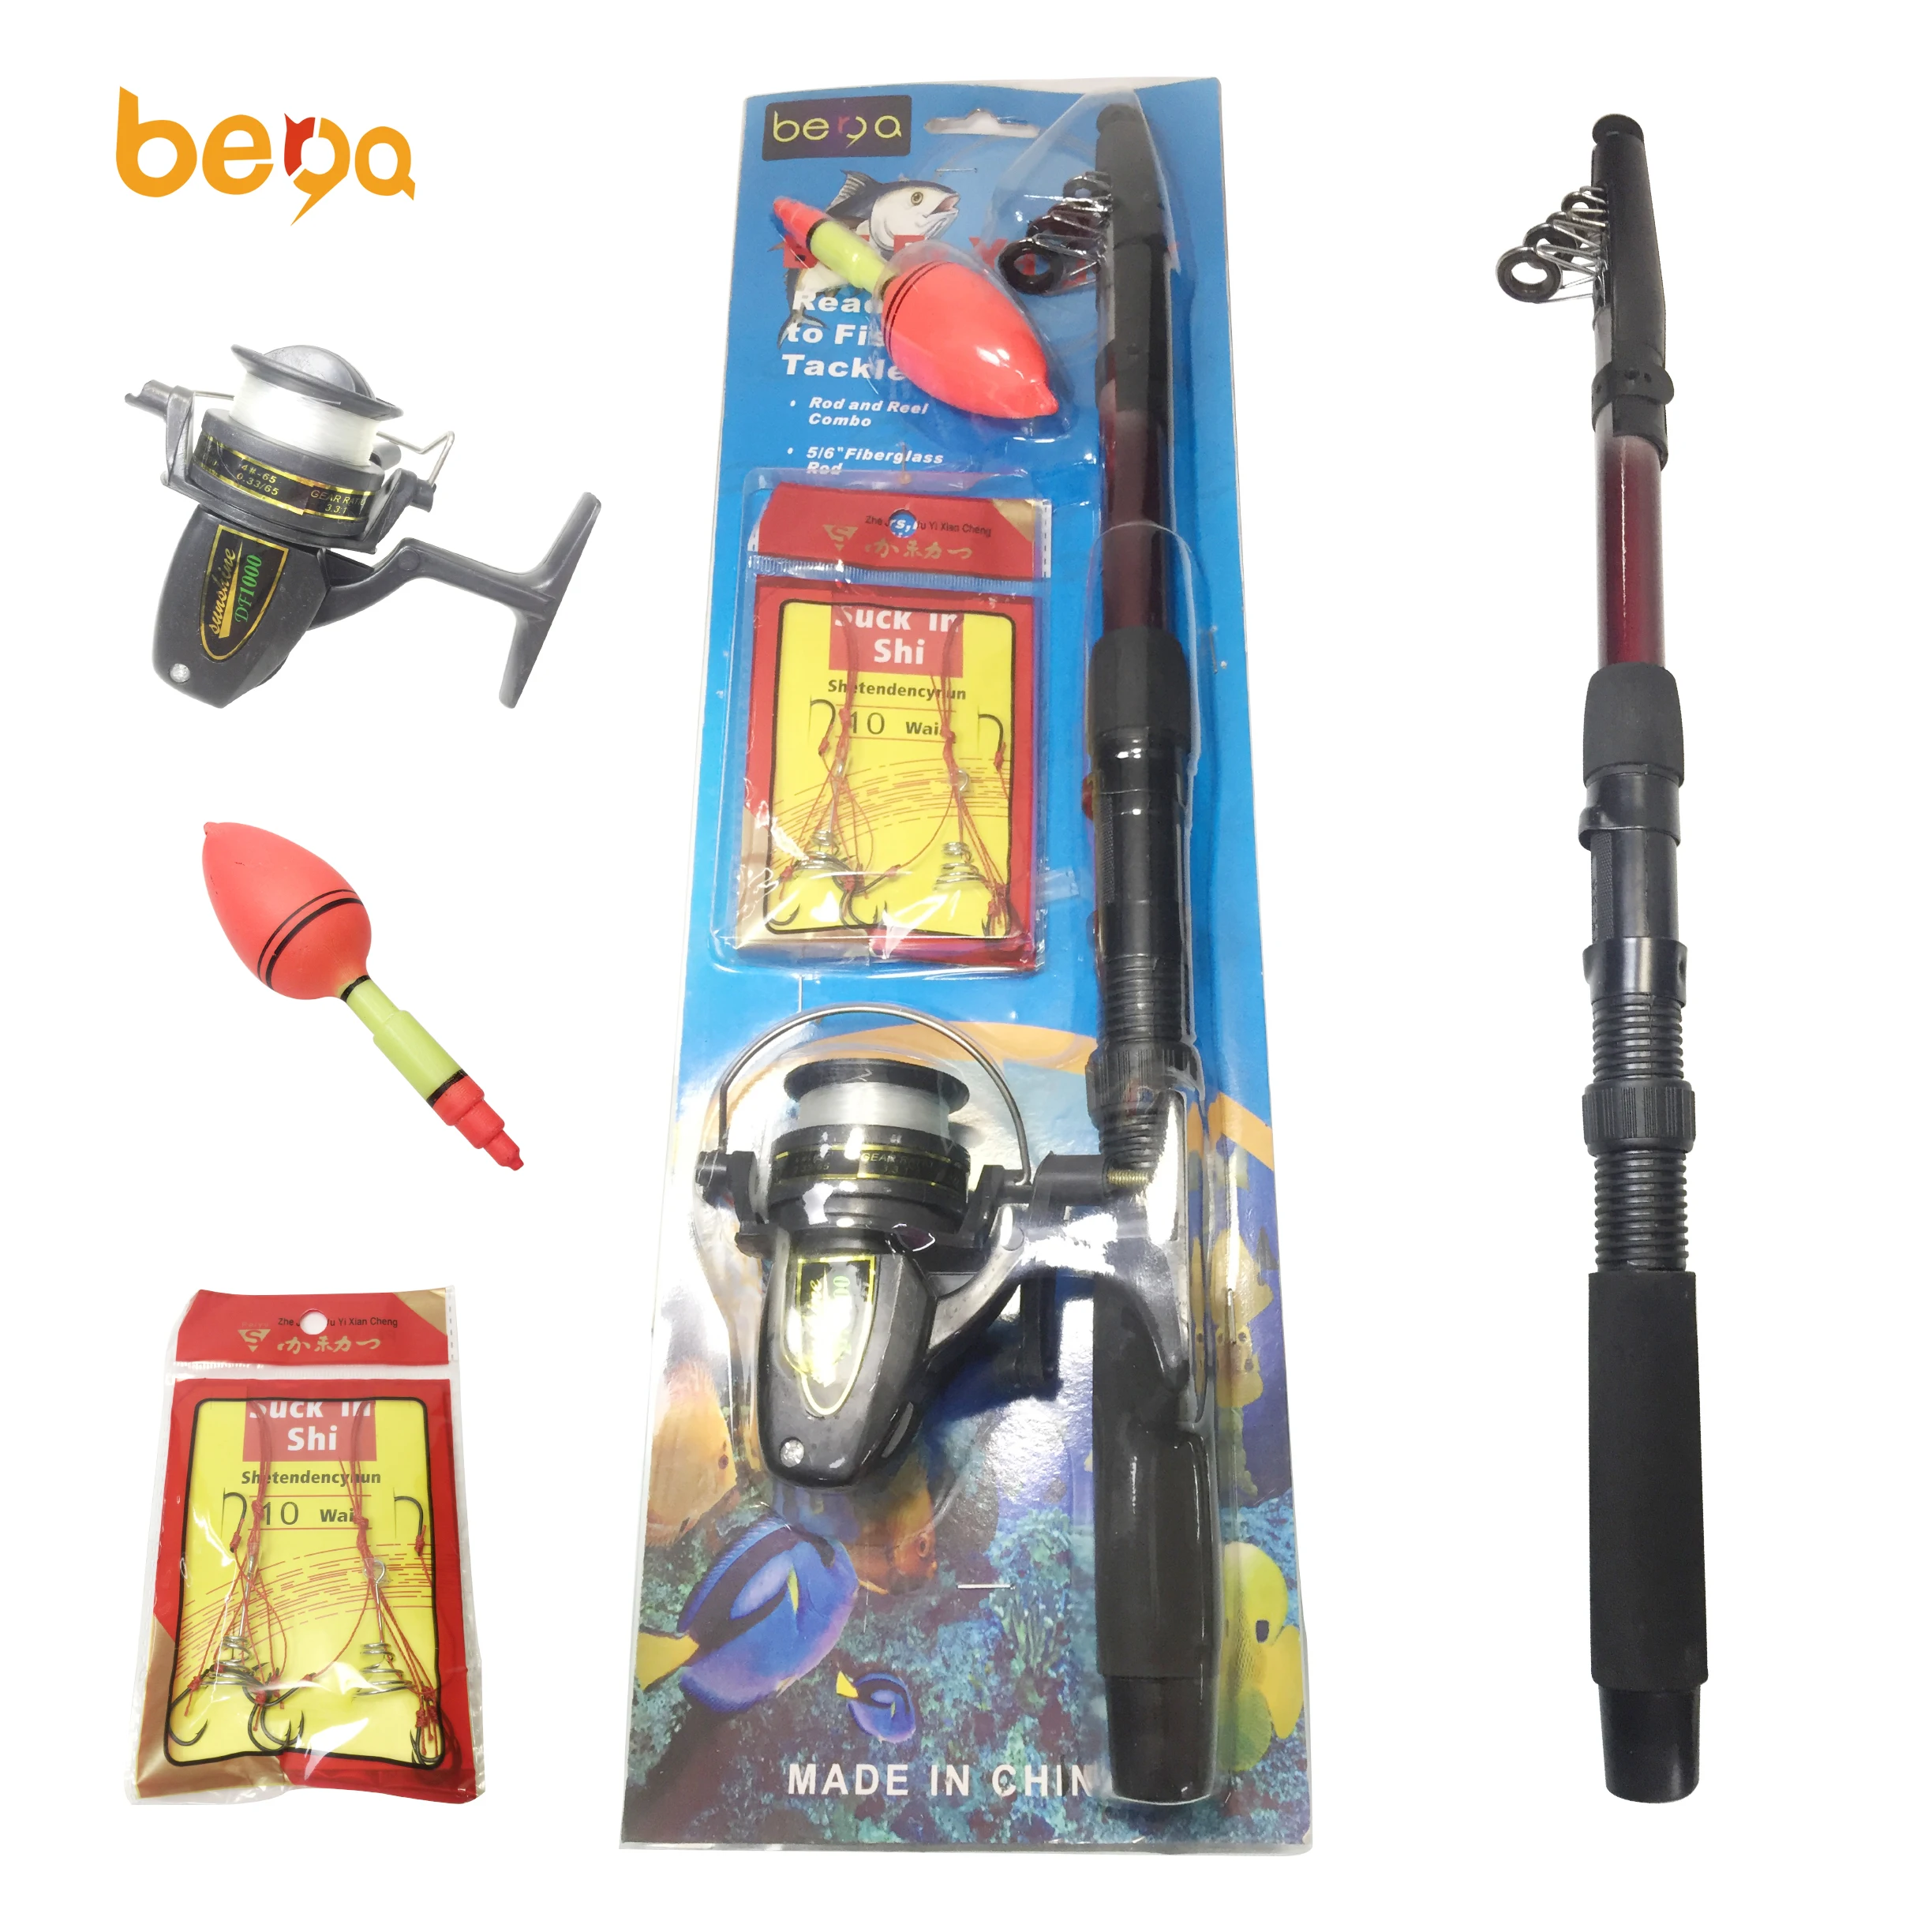 

Cheap Spinning Telescopic Fishing Rod and reel Combo Kit Set with Fishing floats and hooks fishing combo blister package, Black/white/red/yellow/orange, customizable